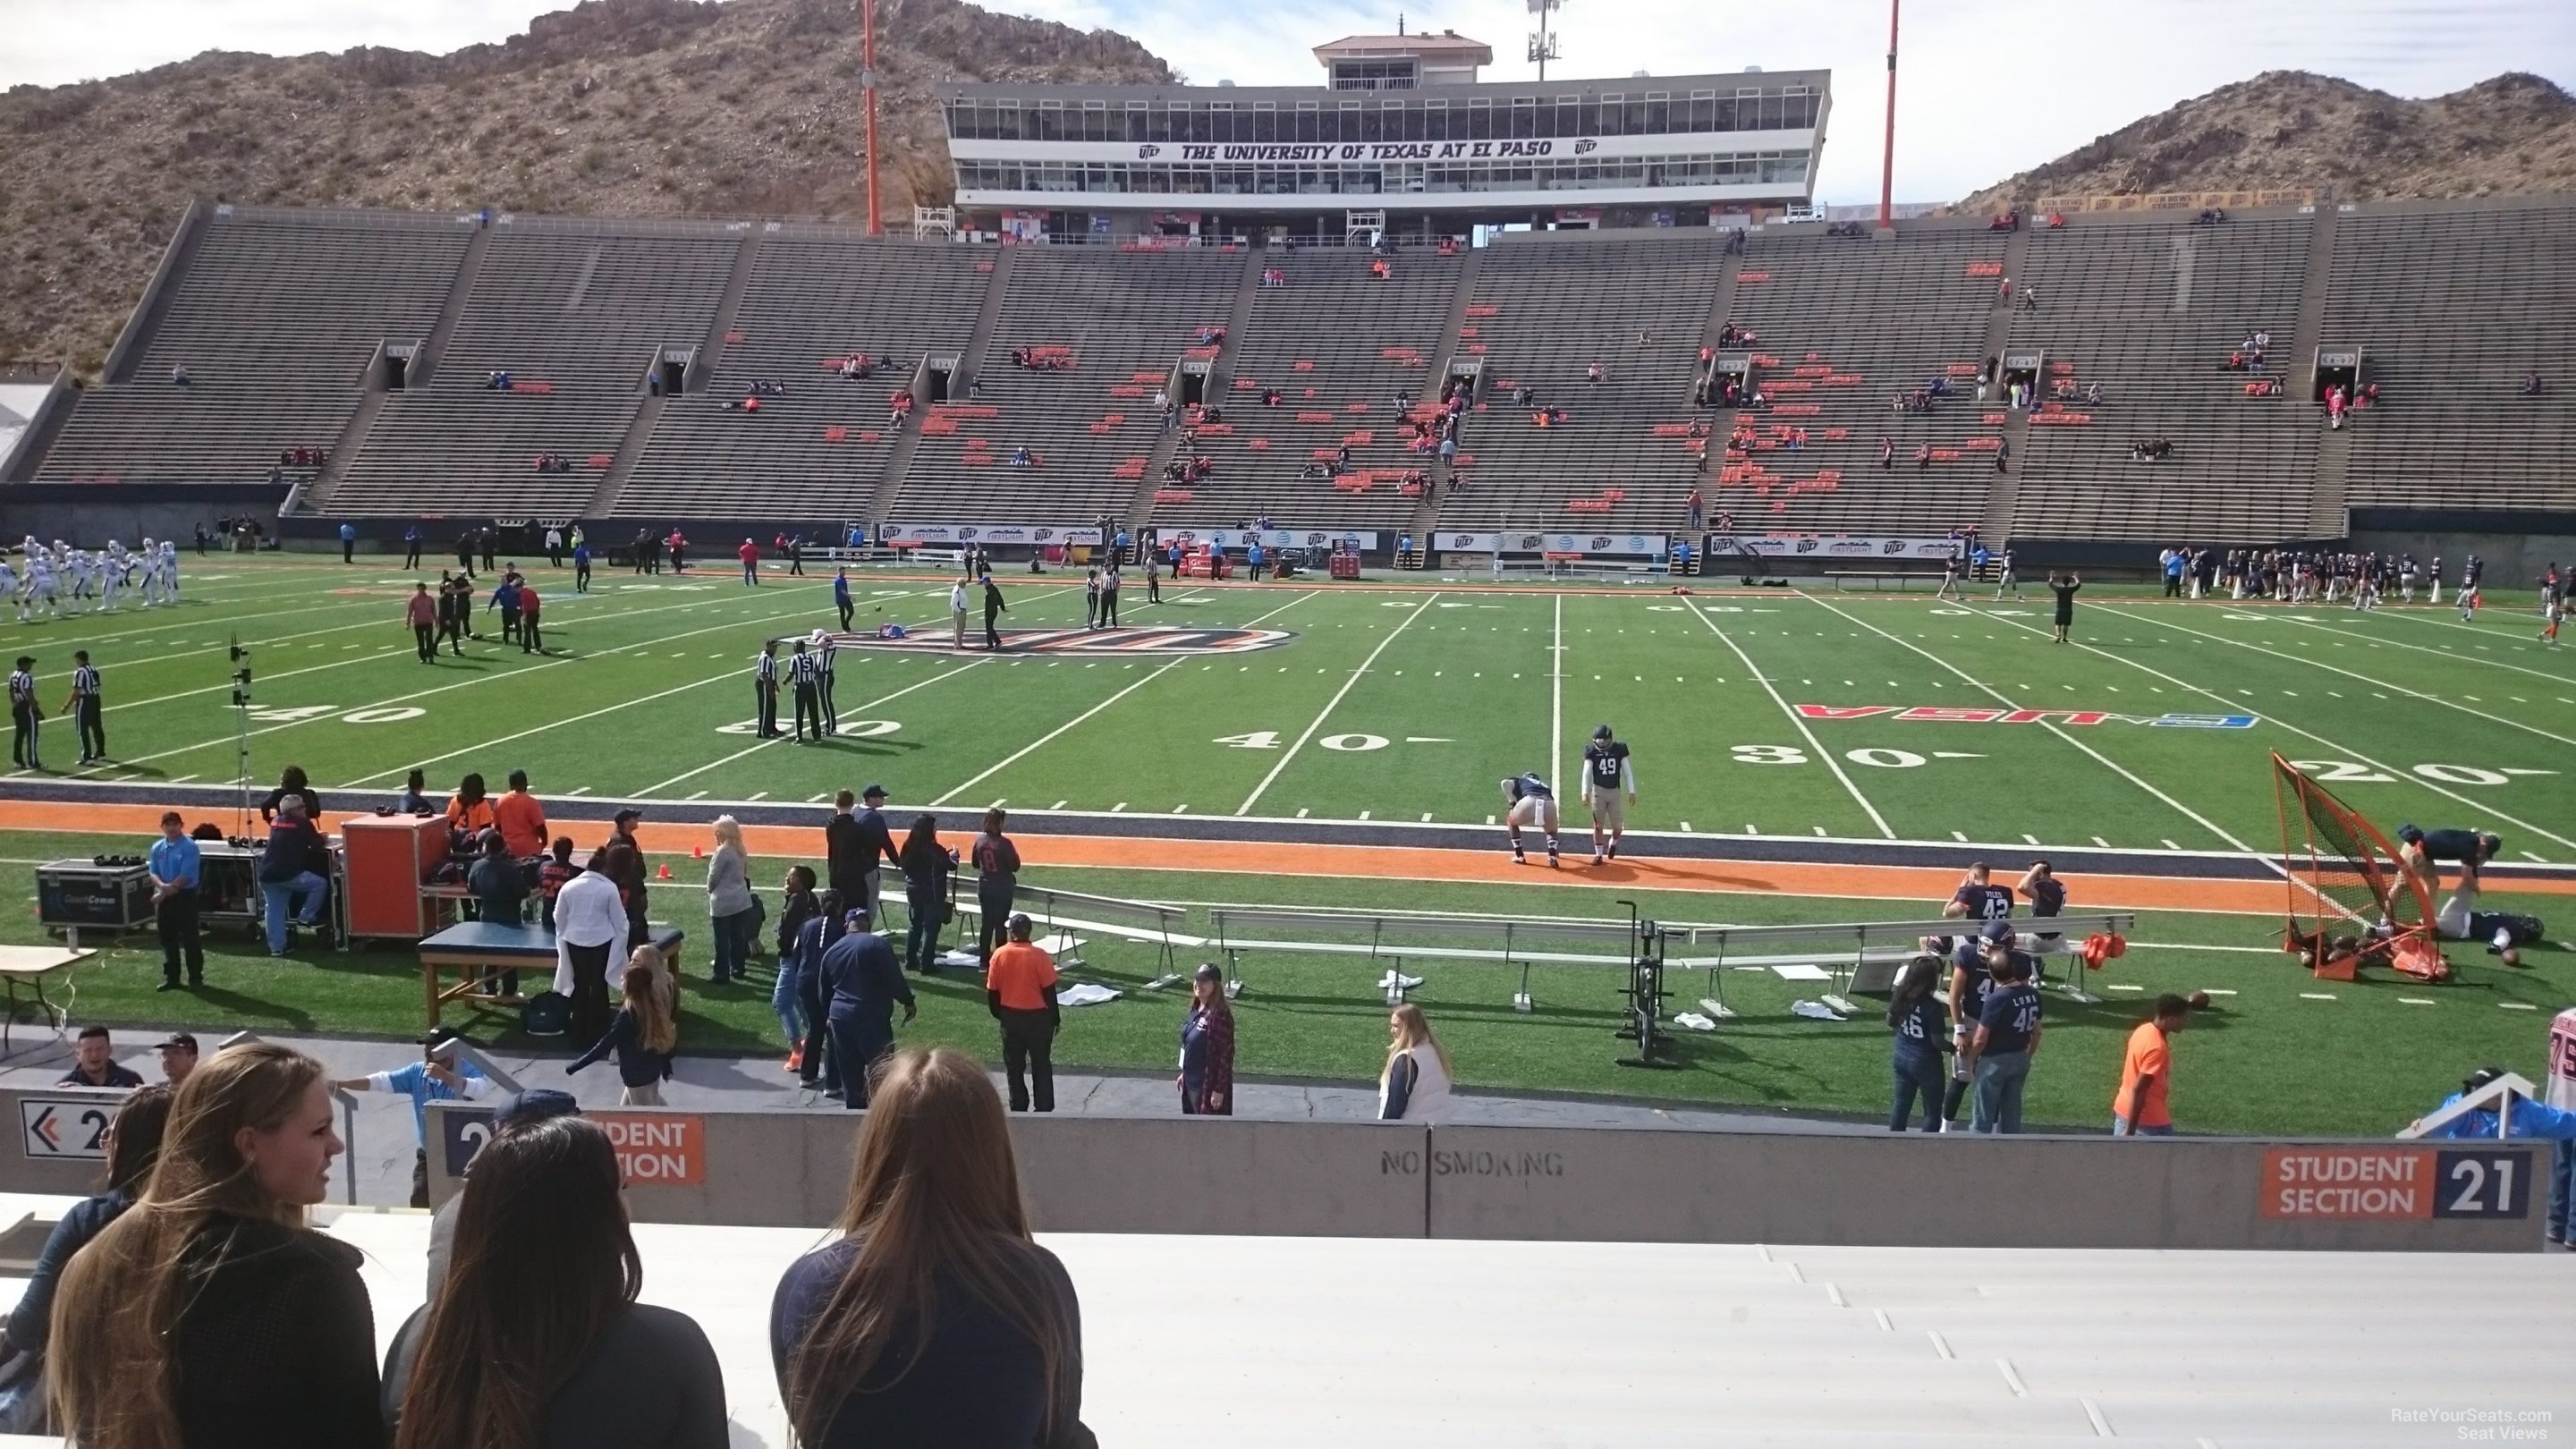 section 21, row 15 seat view  for football - sun bowl